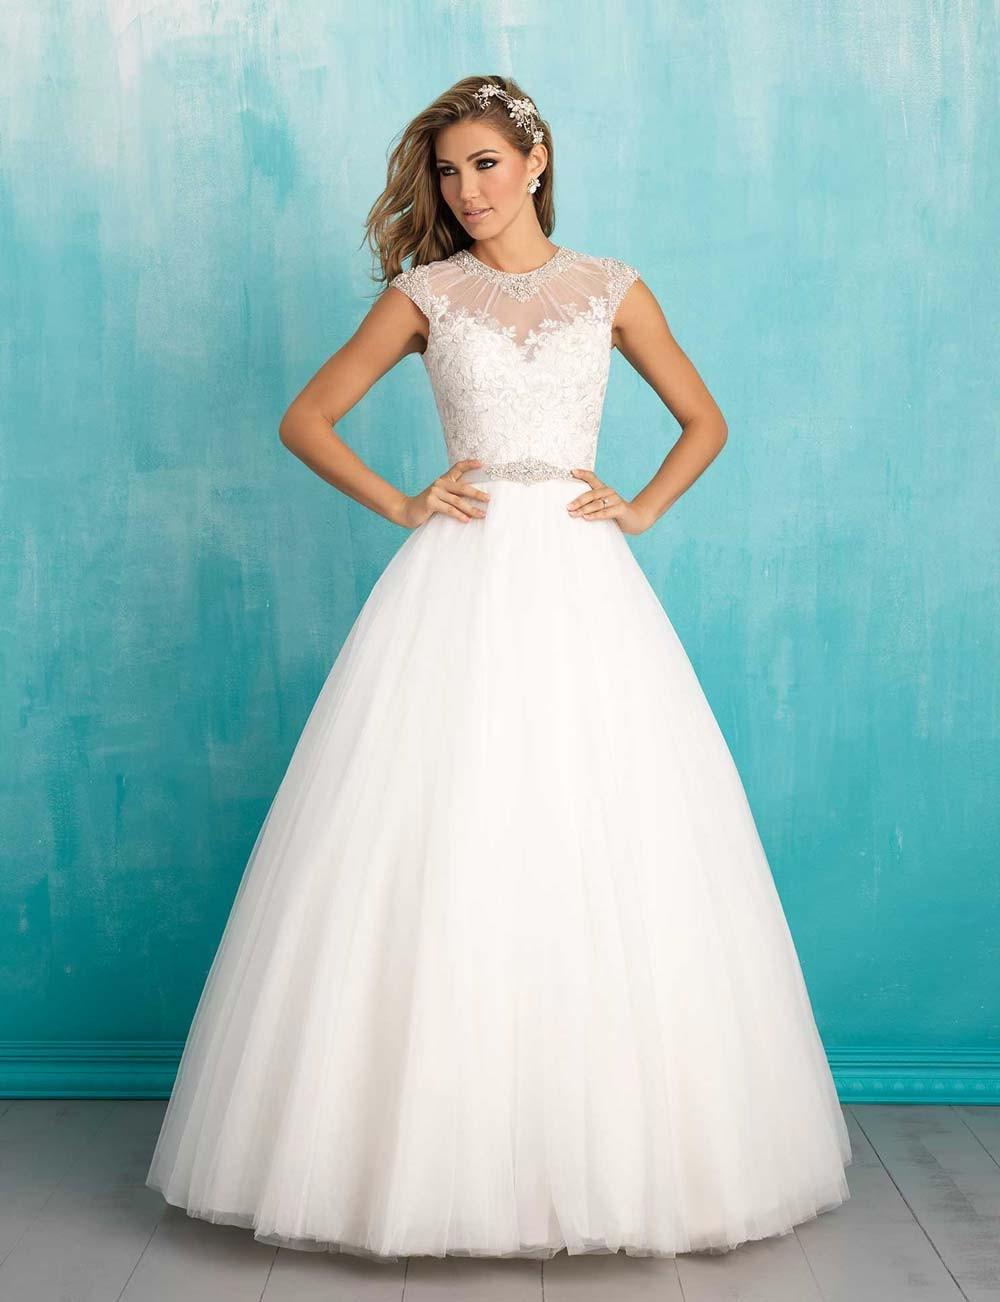 Wedding Dresses with Illusion Necklines: 27 of Our Favourite Styles ...